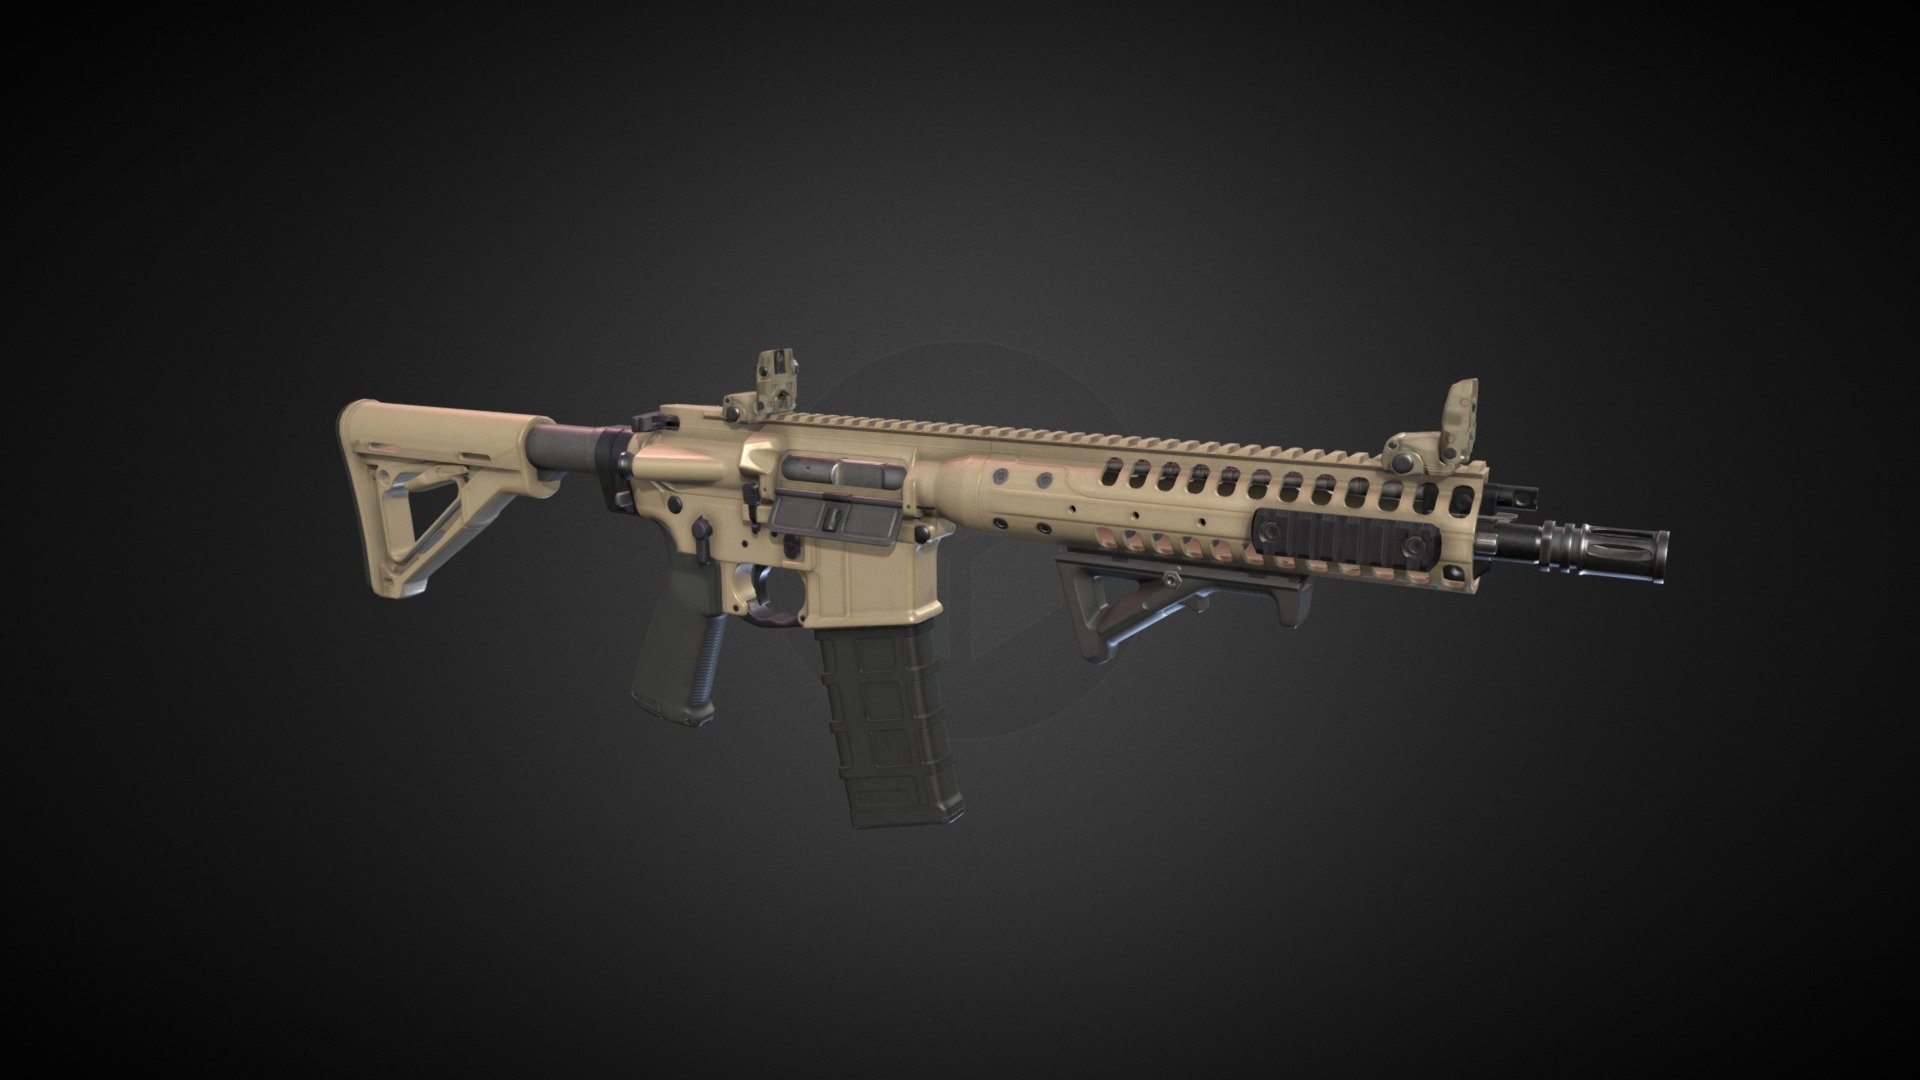 M6 Individual Carbine with short barrel by LWRC&hellip; Not much else to say as its just M4&hellip;  

Model is rigged, there is also version with separate parts(good for VR). Model have 3 main PBR Materials in 4K + separate for iron sights.

Tris:46k

Verts: 24k  

Made in Blender 3d model